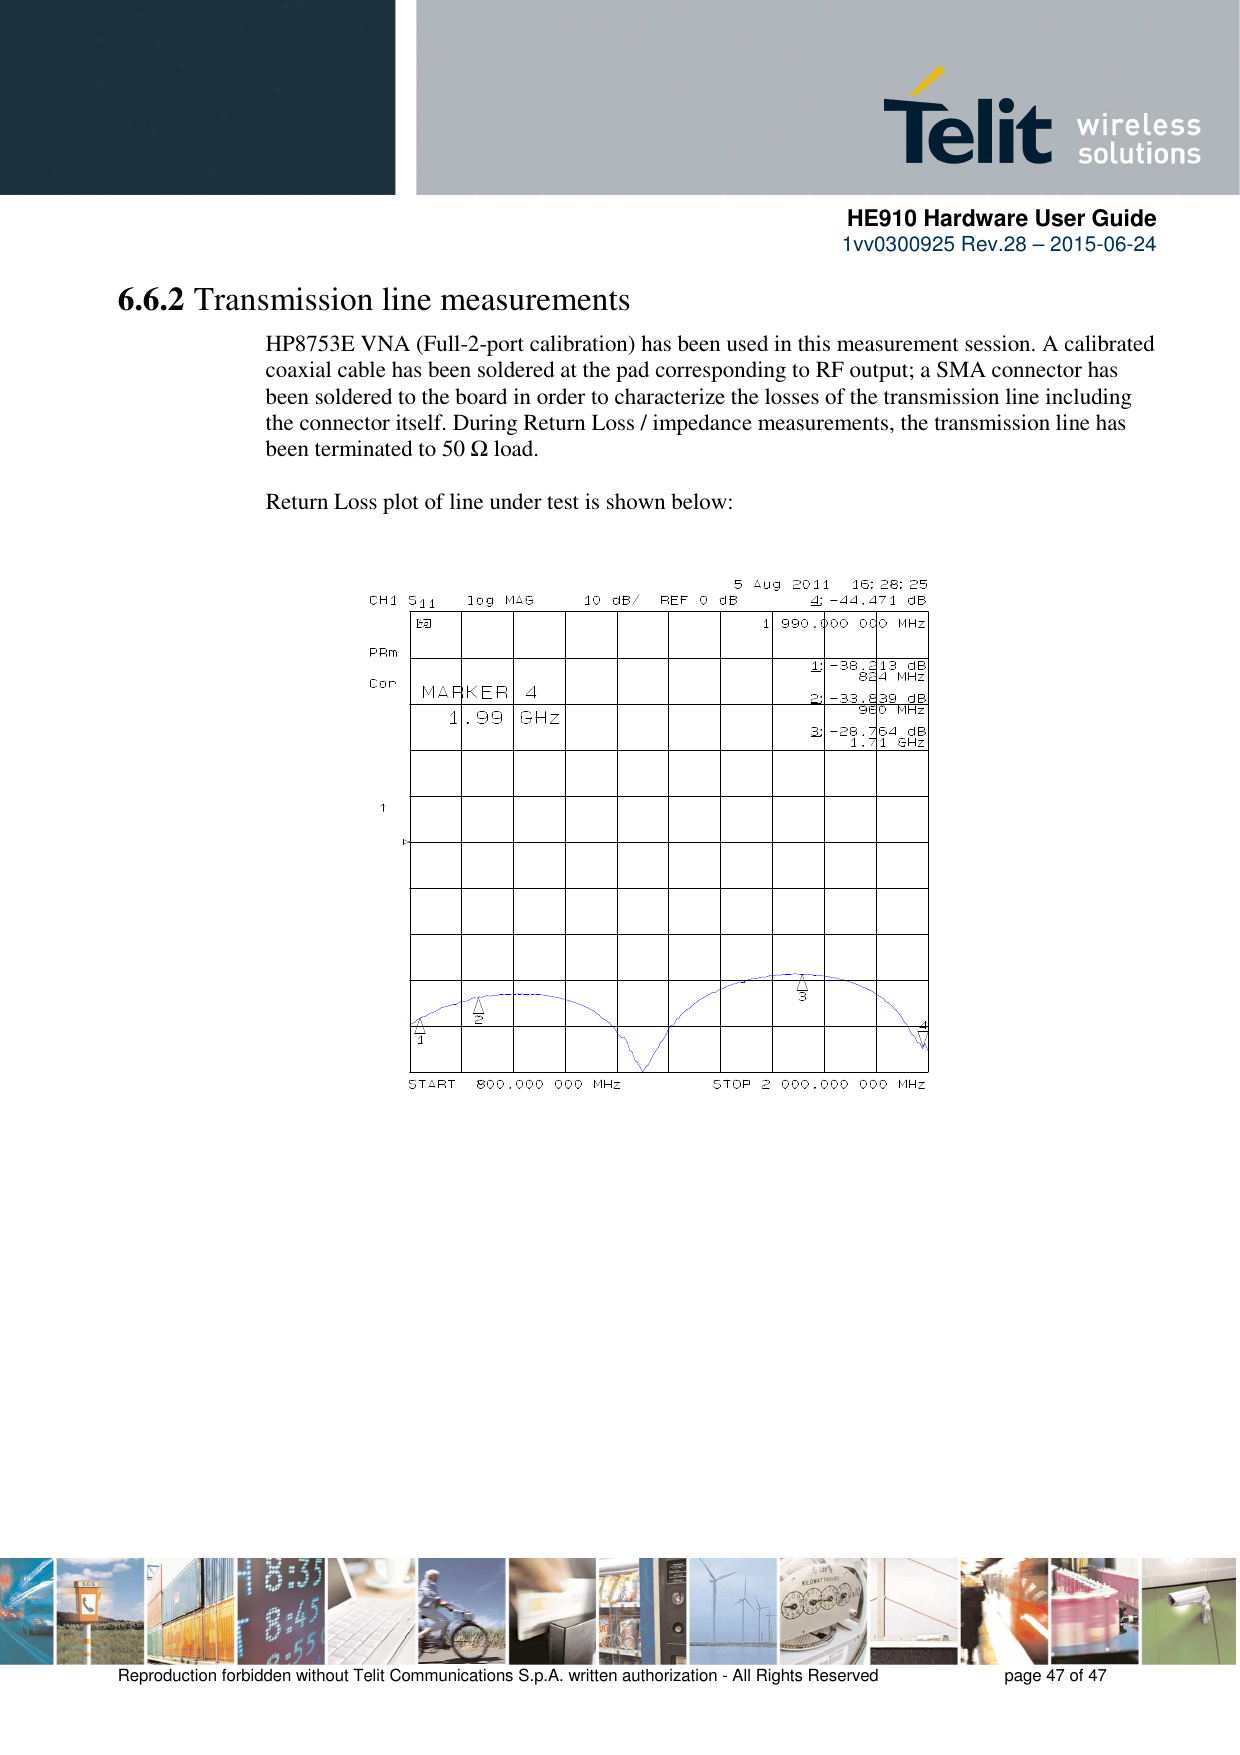      HE910 Hardware User Guide 1vv0300925 Rev.28 – 2015-06-24    Reproduction forbidden without Telit Communications S.p.A. written authorization - All Rights Reserved    page 47 of 47  6.6.2 Transmission line measurements HP8753E VNA (Full-2-port calibration) has been used in this measurement session. A calibrated coaxial cable has been soldered at the pad corresponding to RF output; a SMA connector has been soldered to the board in order to characterize the losses of the transmission line including the connector itself. During Return Loss / impedance measurements, the transmission line has been terminated to 50 Ω load.  Return Loss plot of line under test is shown below:                            